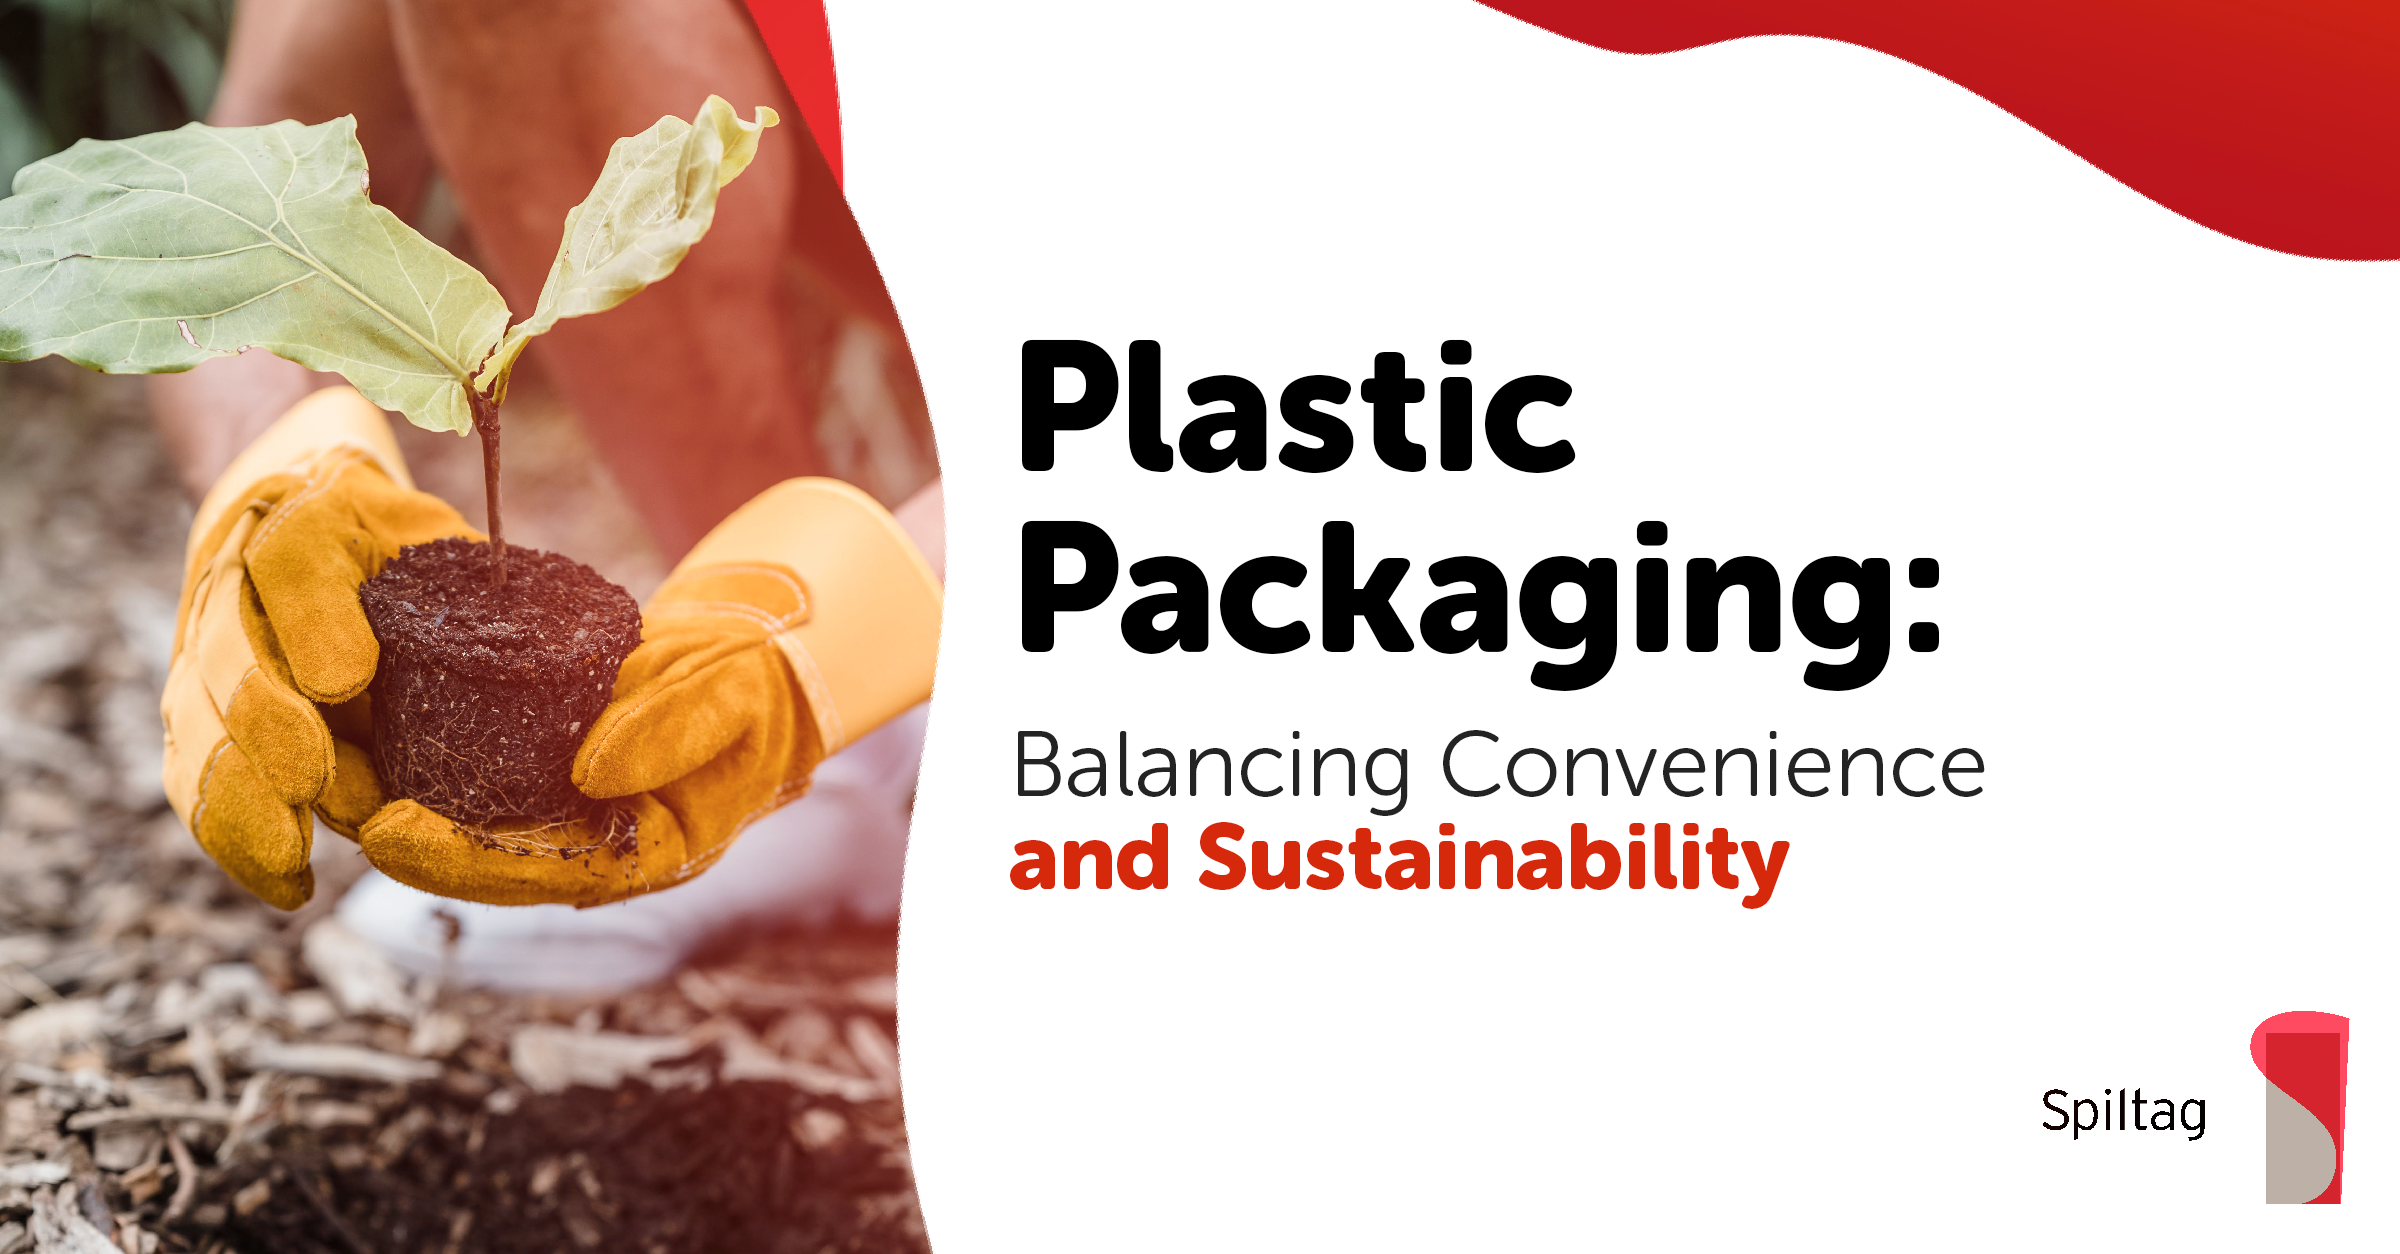 Plastick Packaging: Balancing Convenience and Sustainability